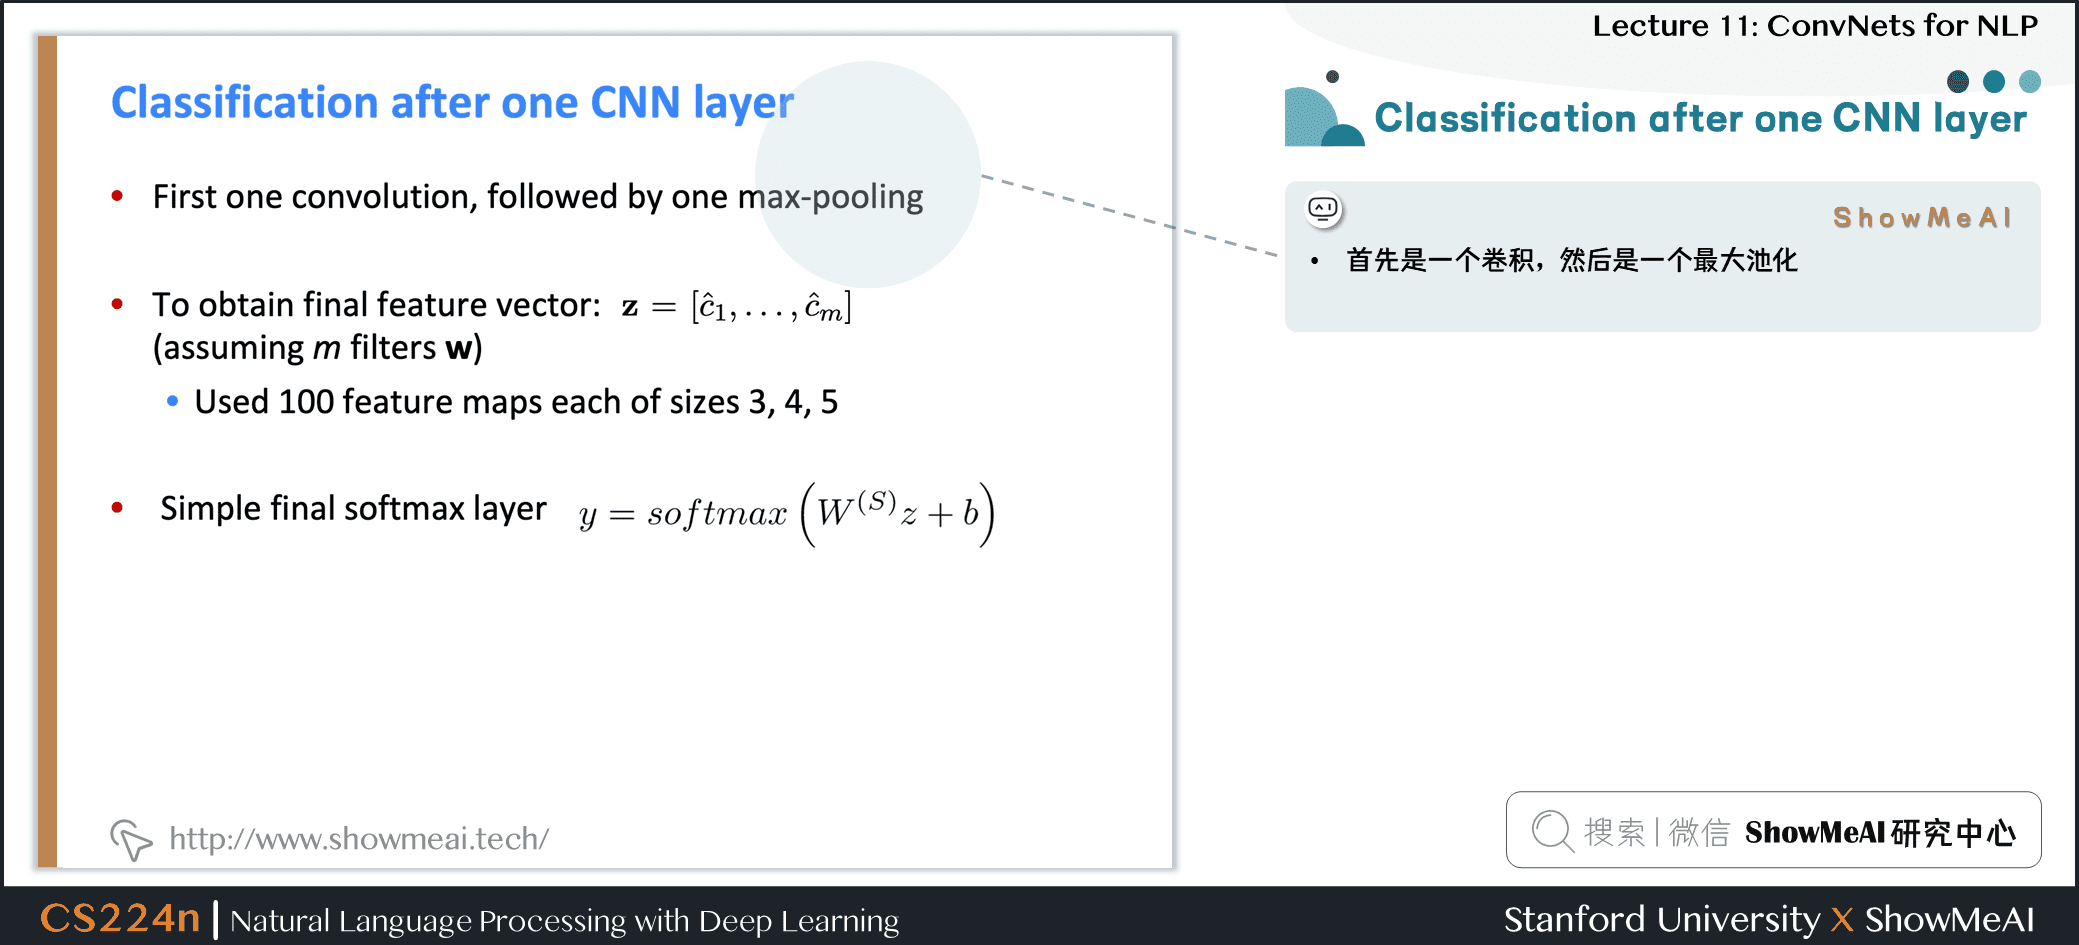 Classification after one CNN layer